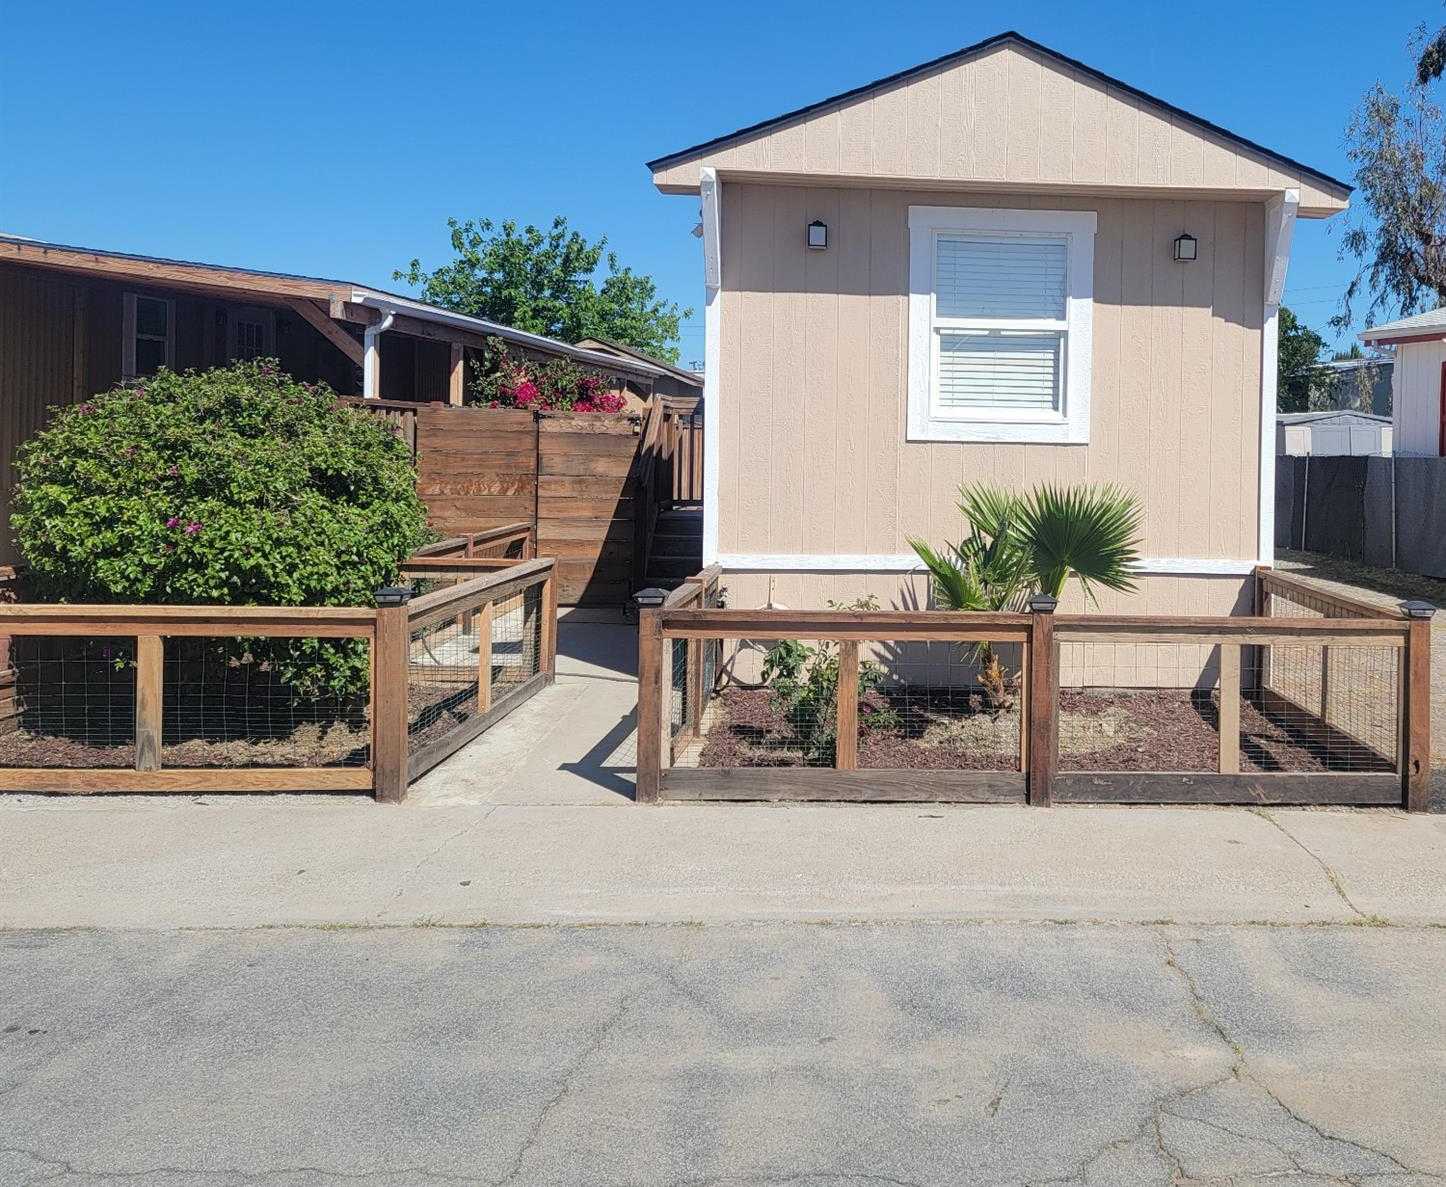 $95,000 - 3Br/2Ba -  for Sale in Gustine